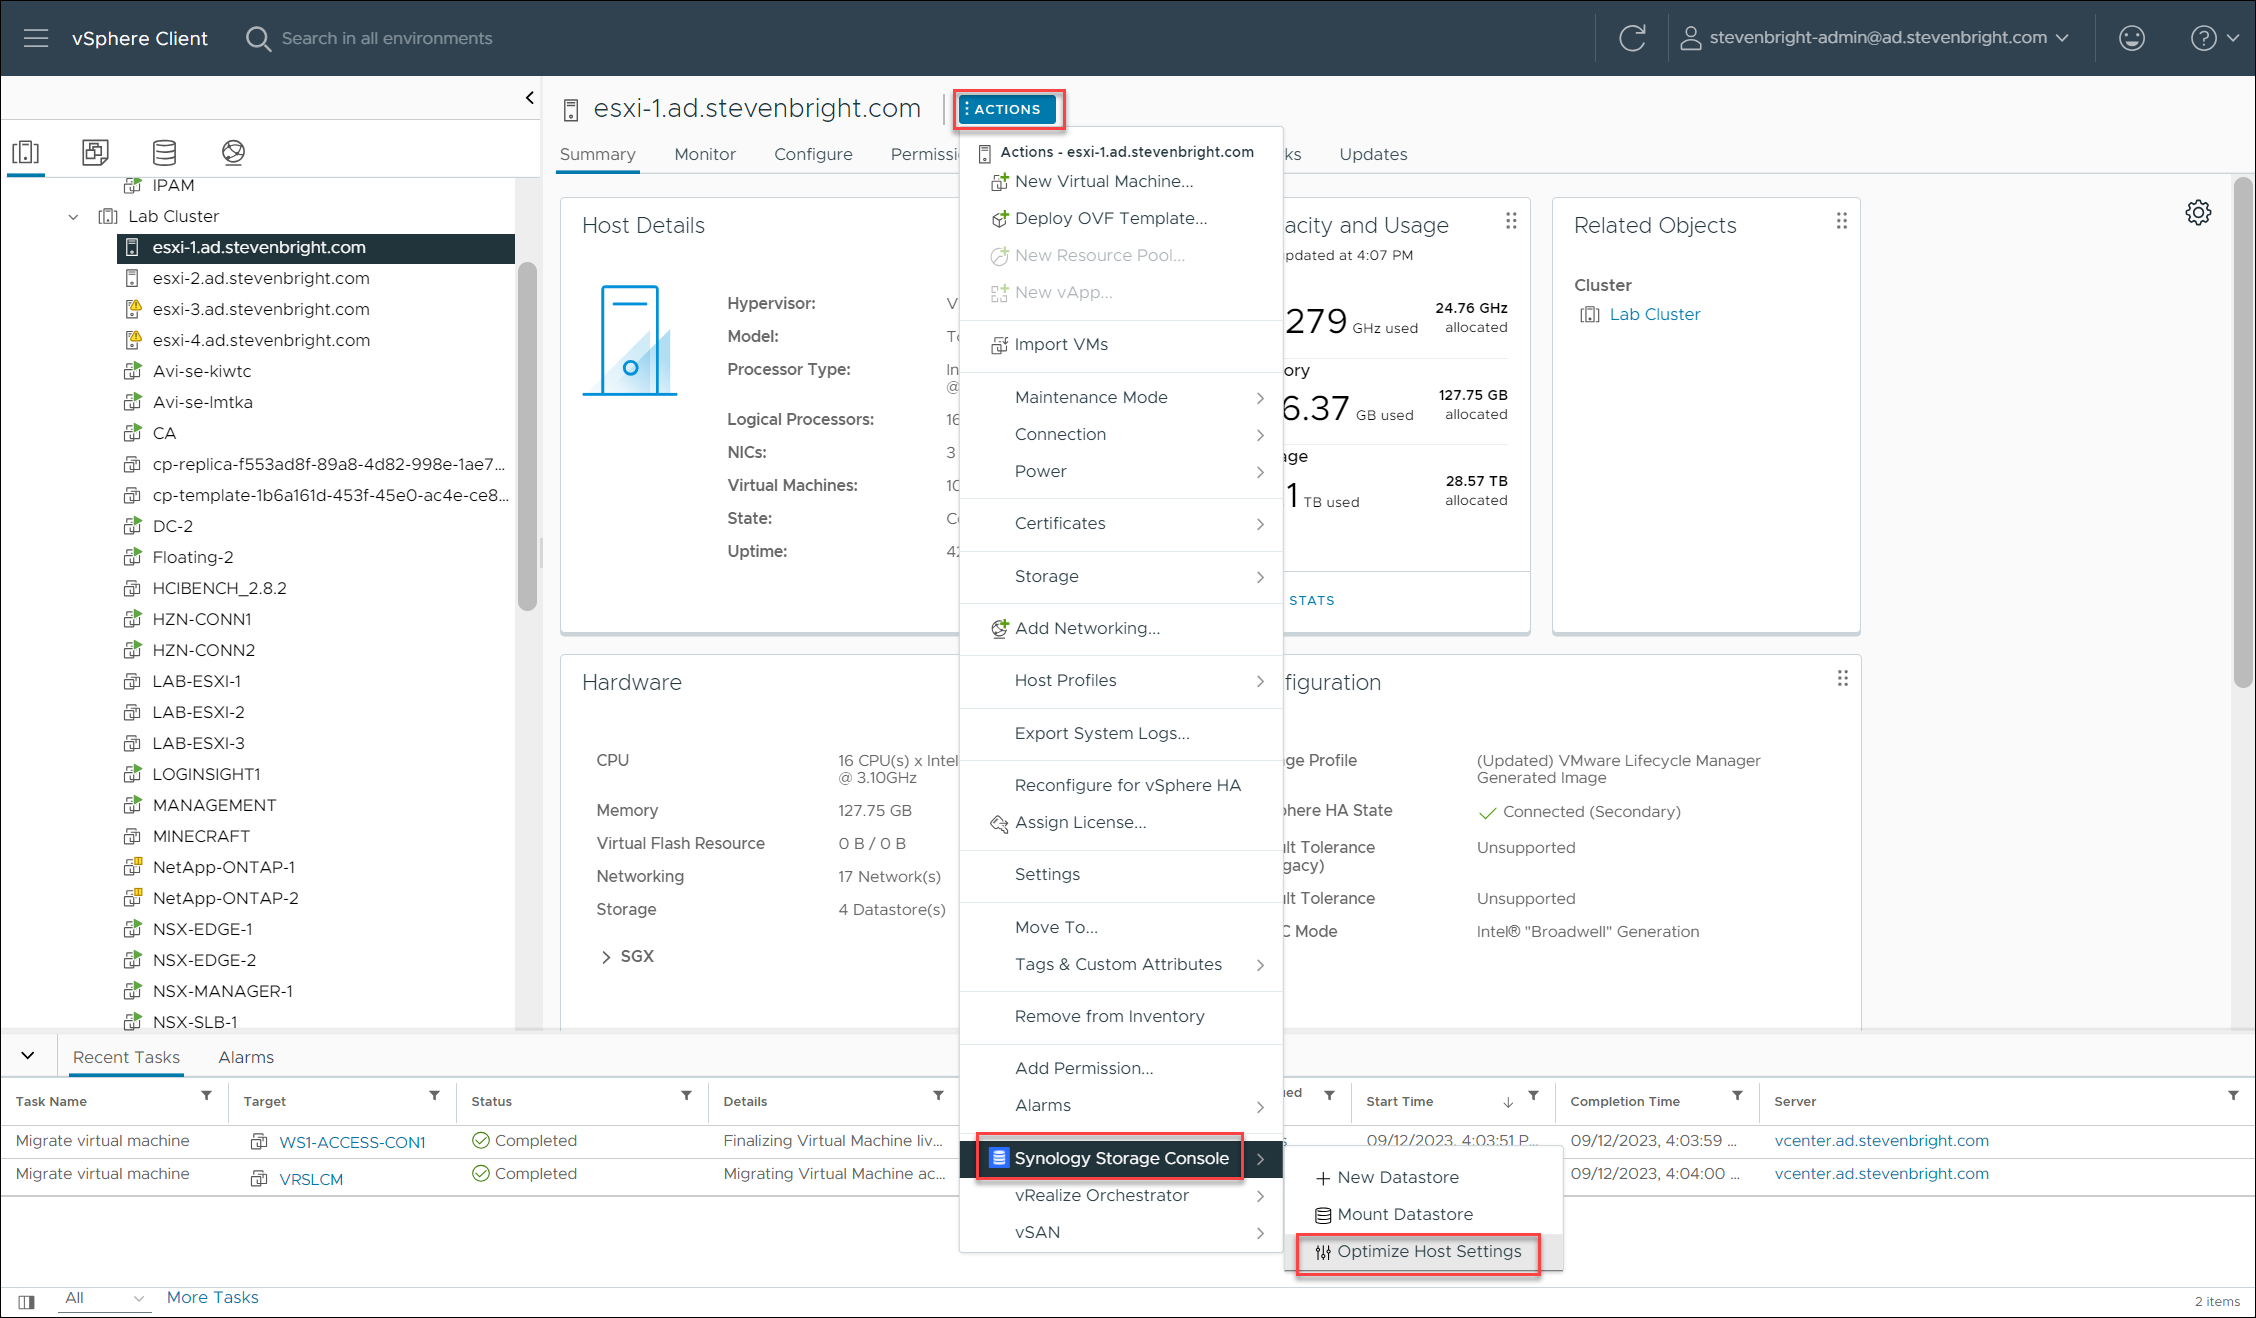 VMware vSphere Client - Accessing the Synology Storage Console Optimize Host Settings